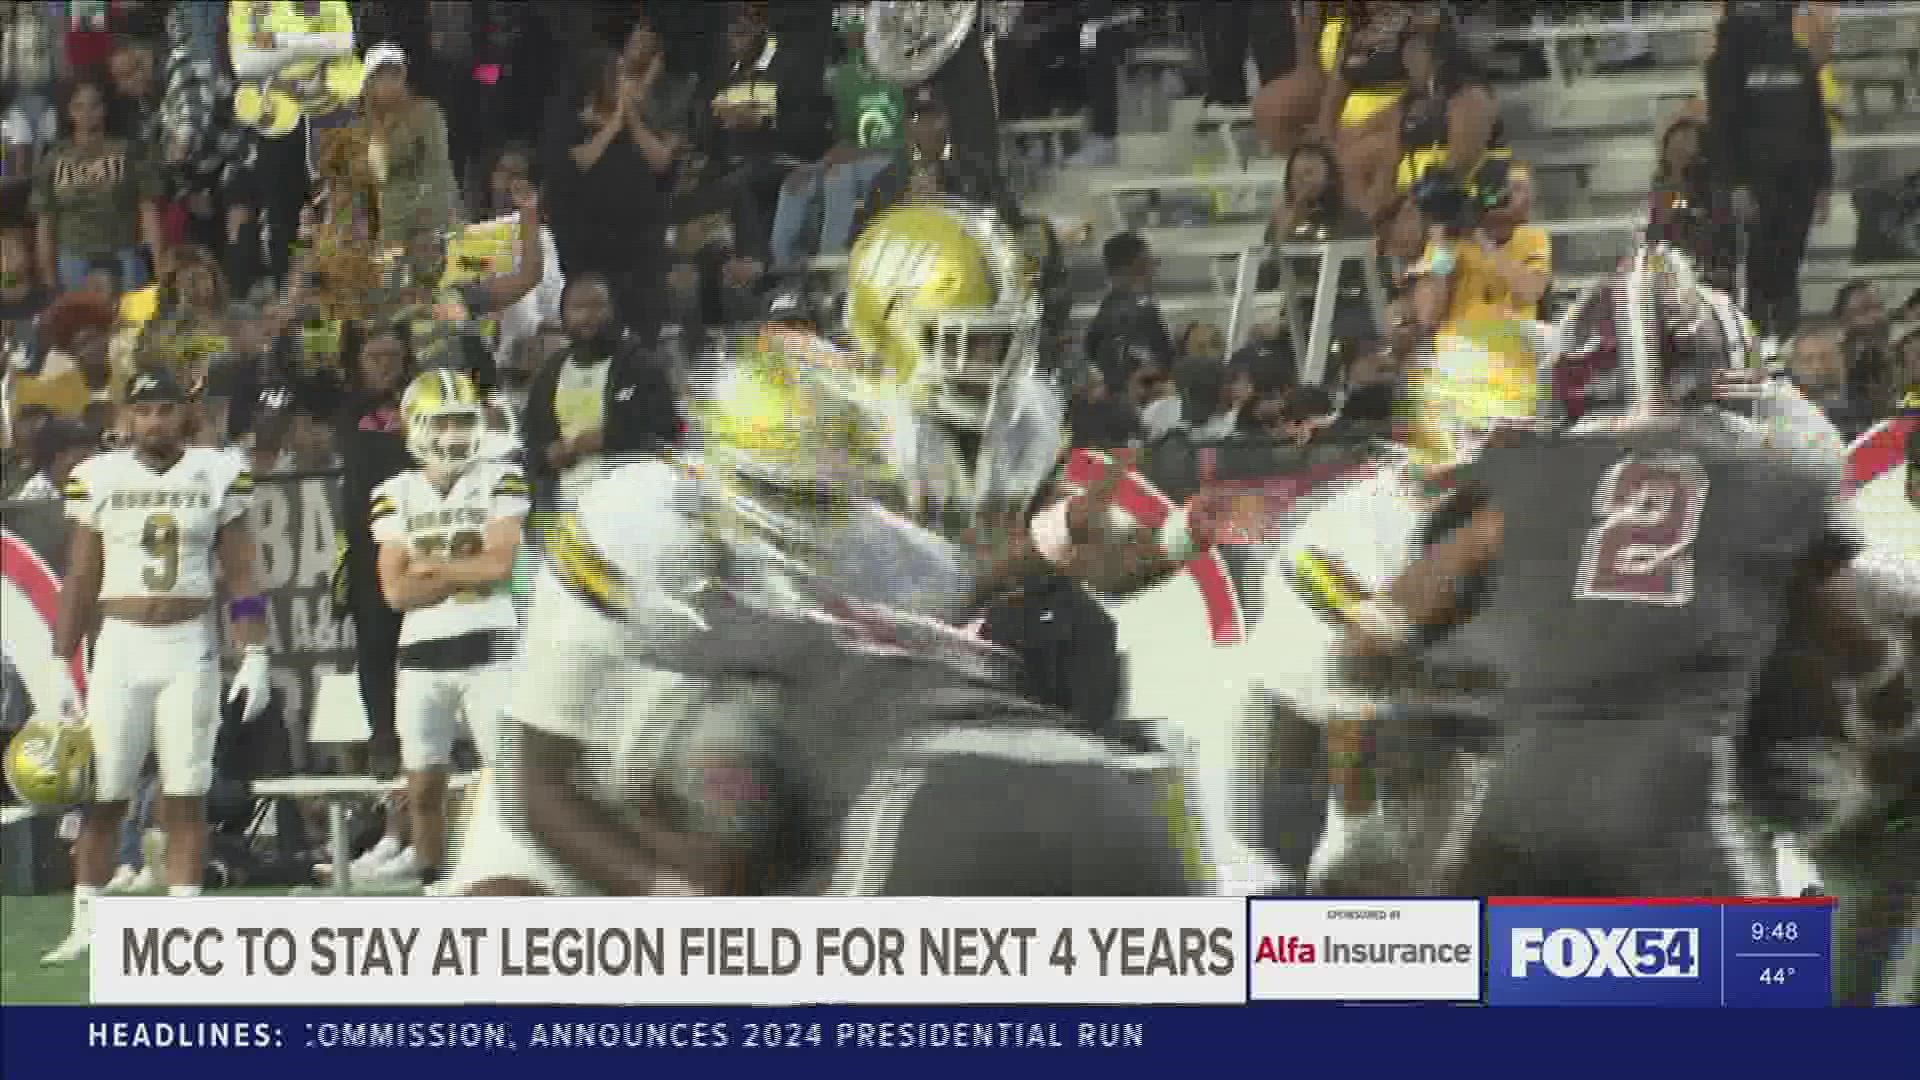 In addition to the contract keeping the Magic City Classic at Legion Field until 2026, both Alabama A&M and Alabama State will receive $500,000 per year